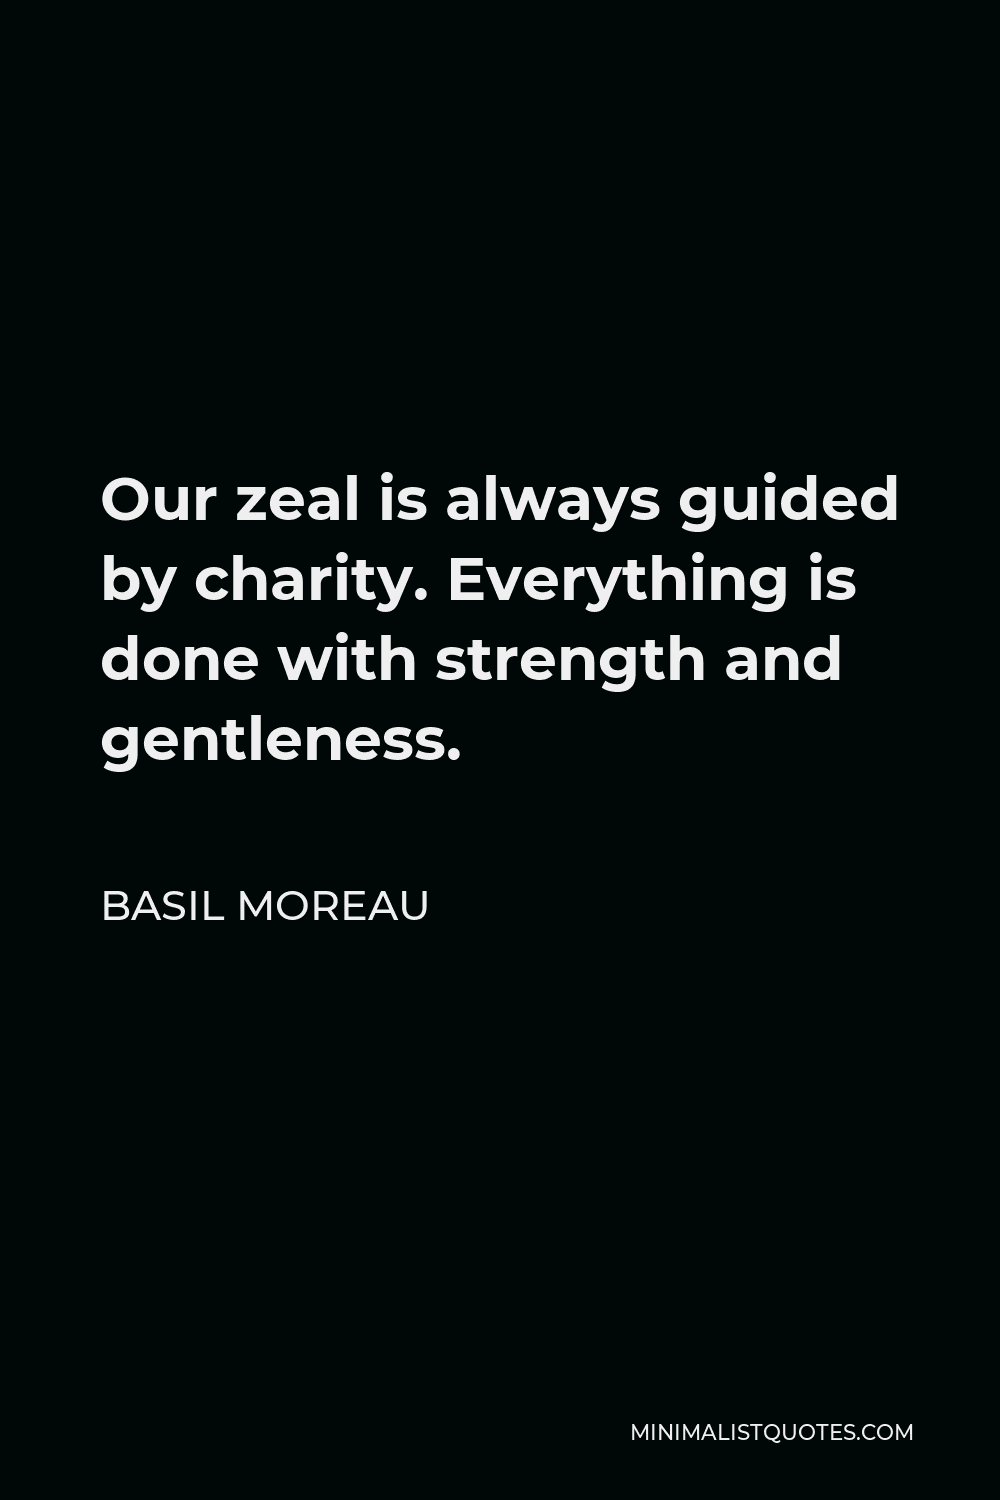 Basil Moreau Quote - Our zeal is always guided by charity. Everything is done with strength and gentleness.